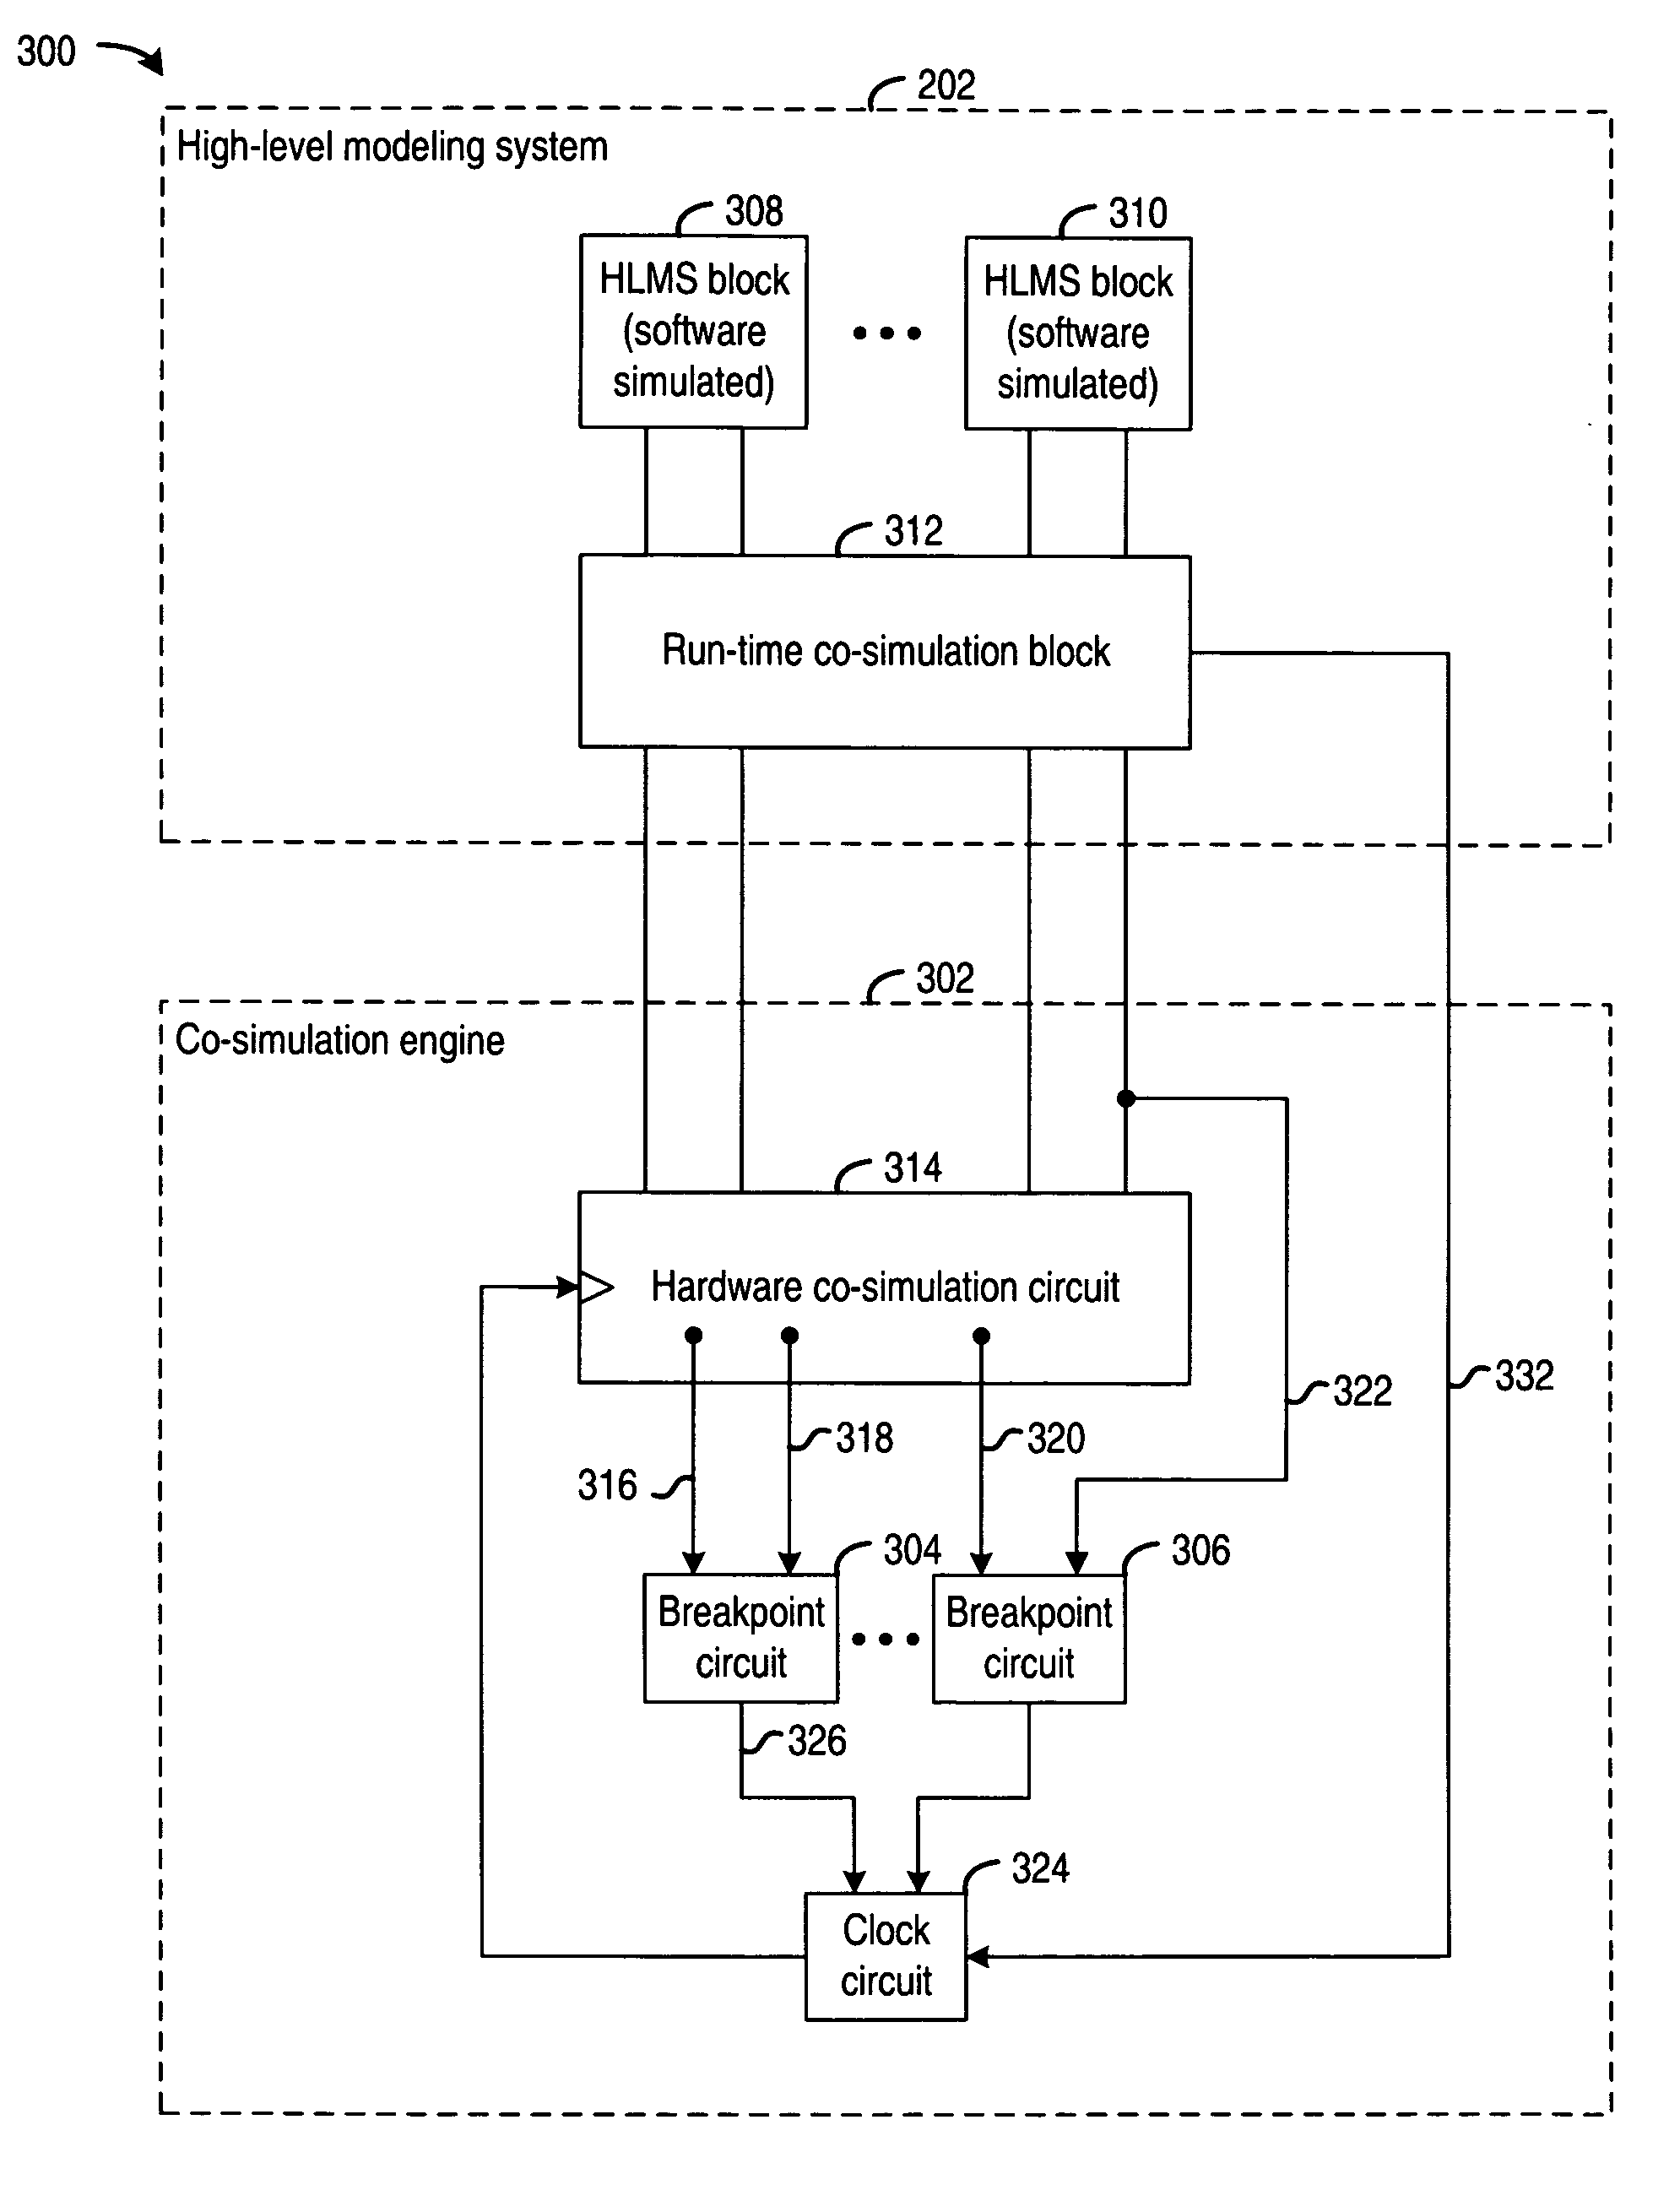 Hardware co-simulation breakpoints in a high-level modeling system